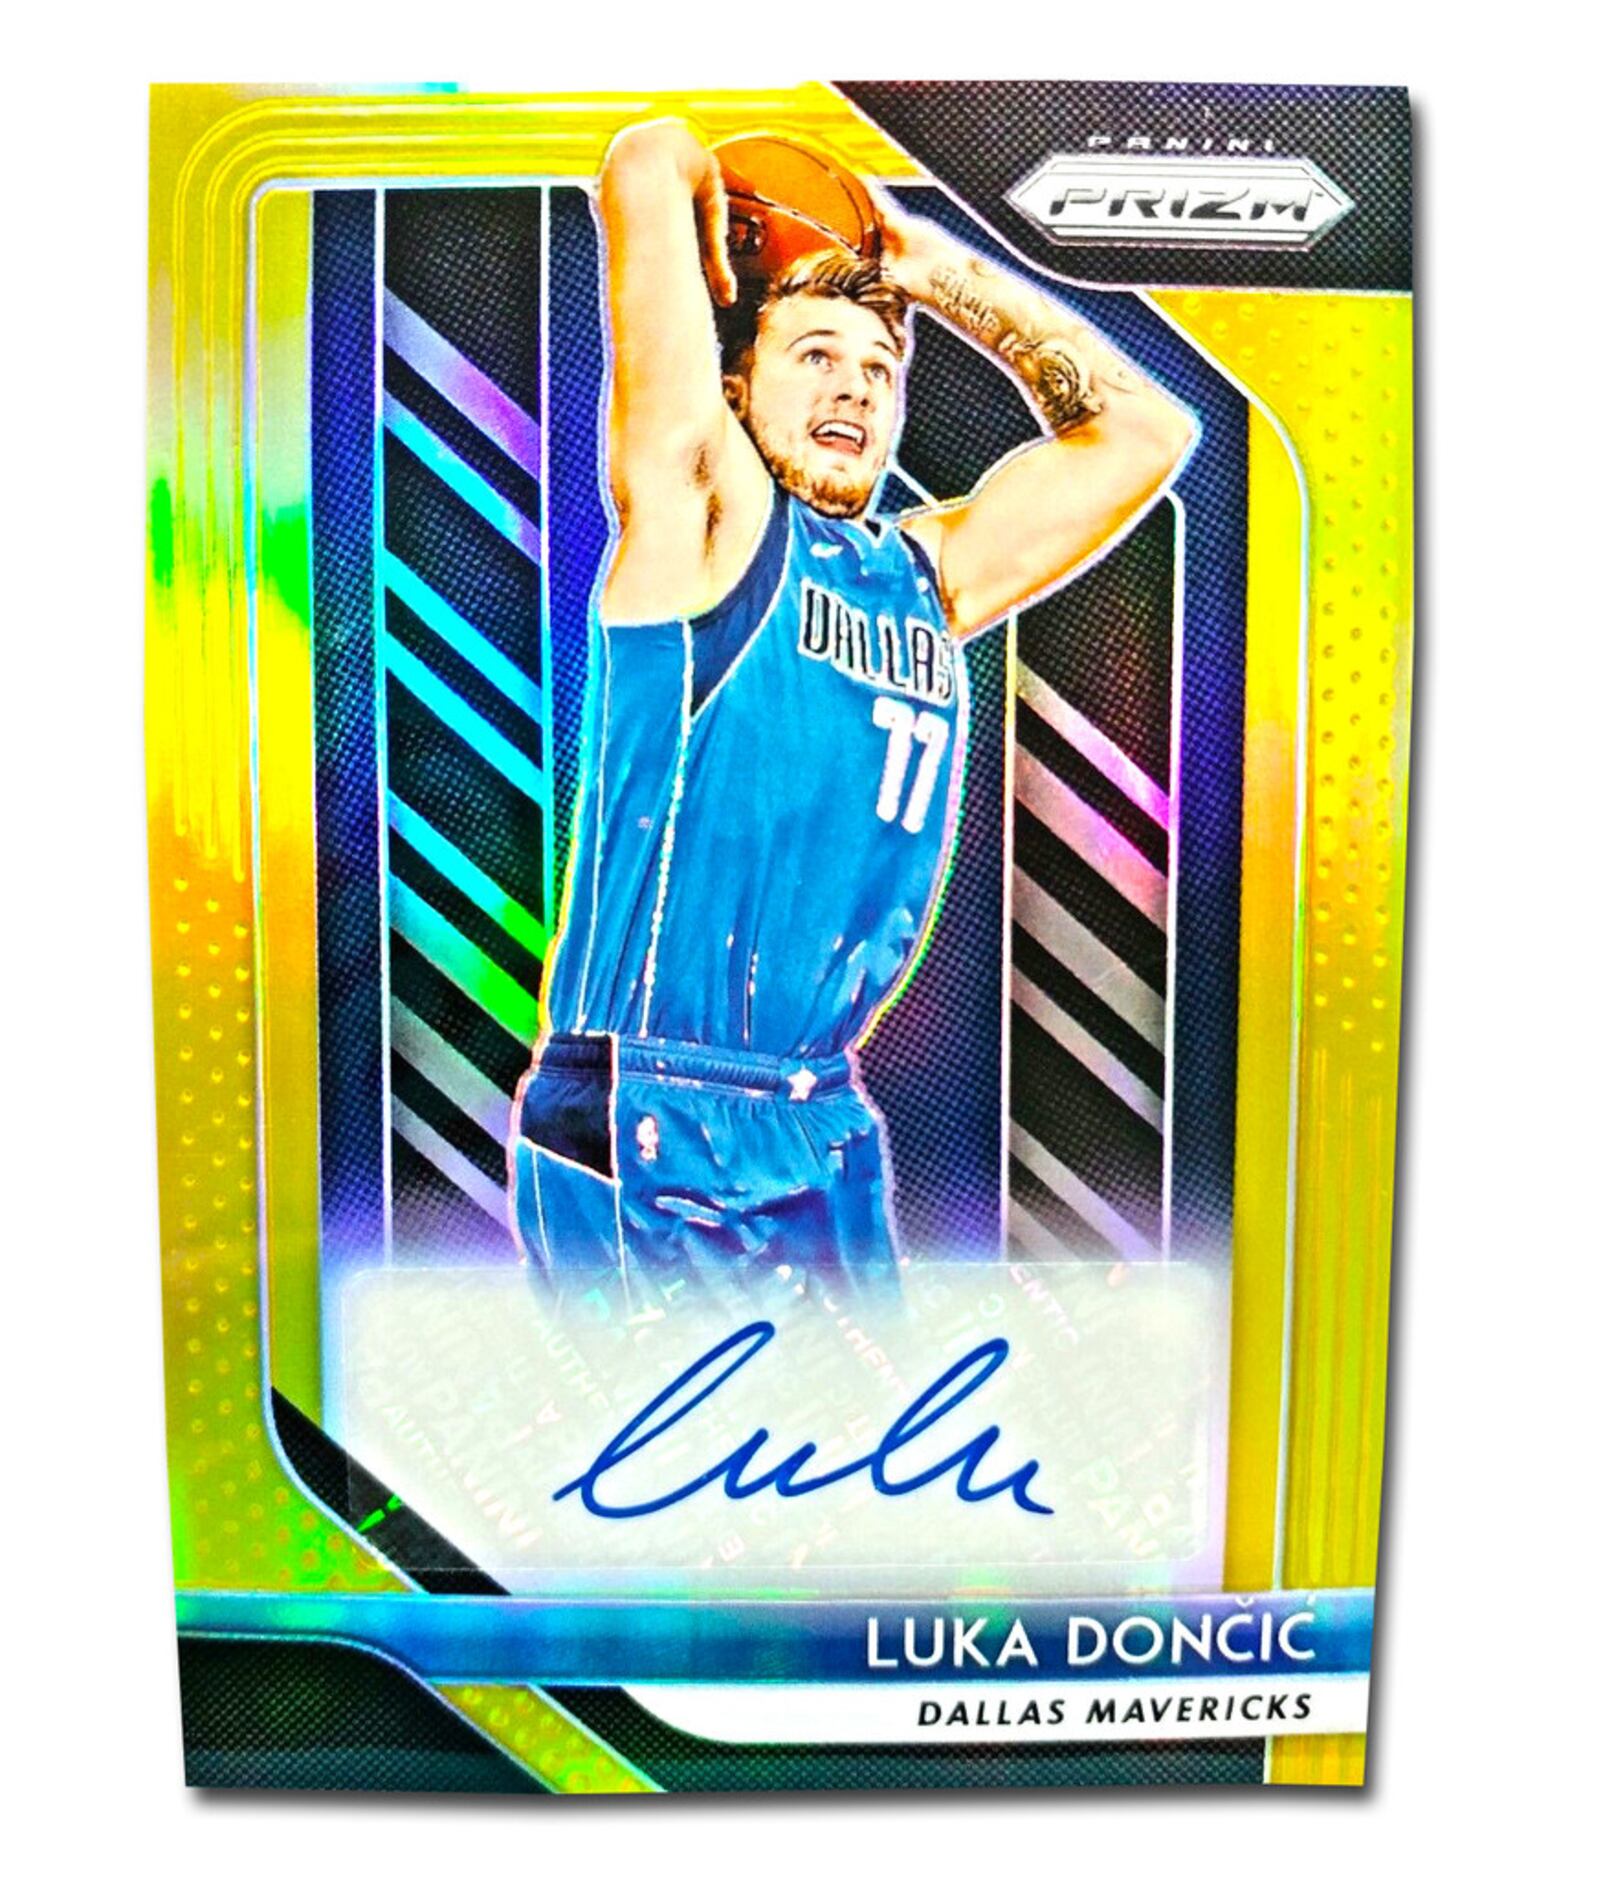 Already a marketing draw, Luka Doncic is poised to dominate NBA